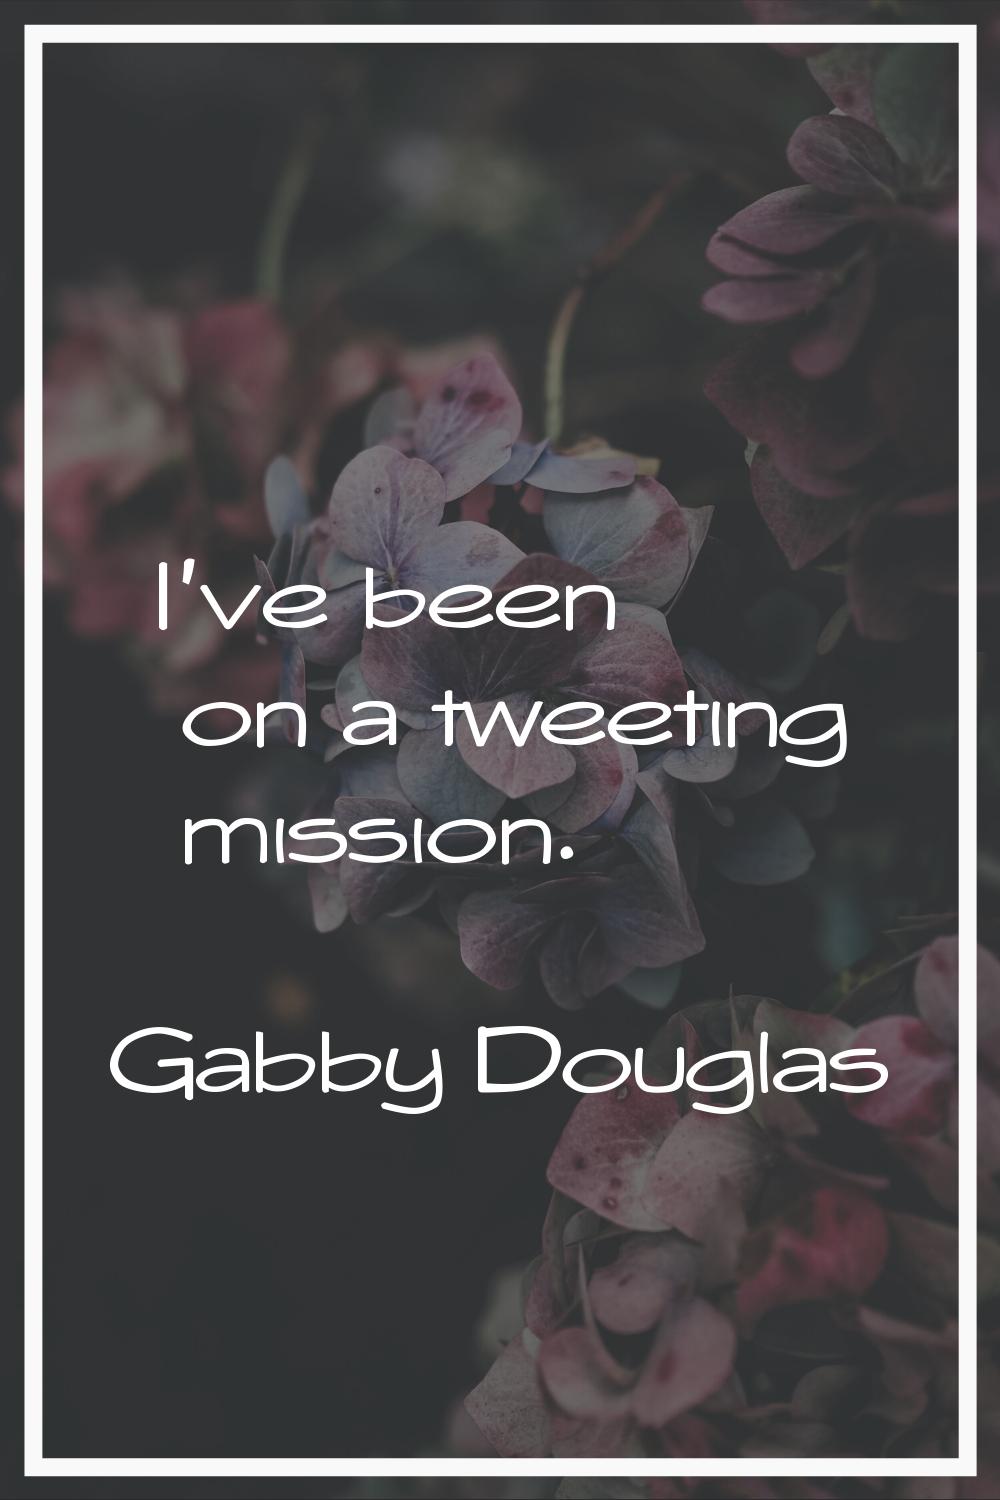 I've been on a tweeting mission.